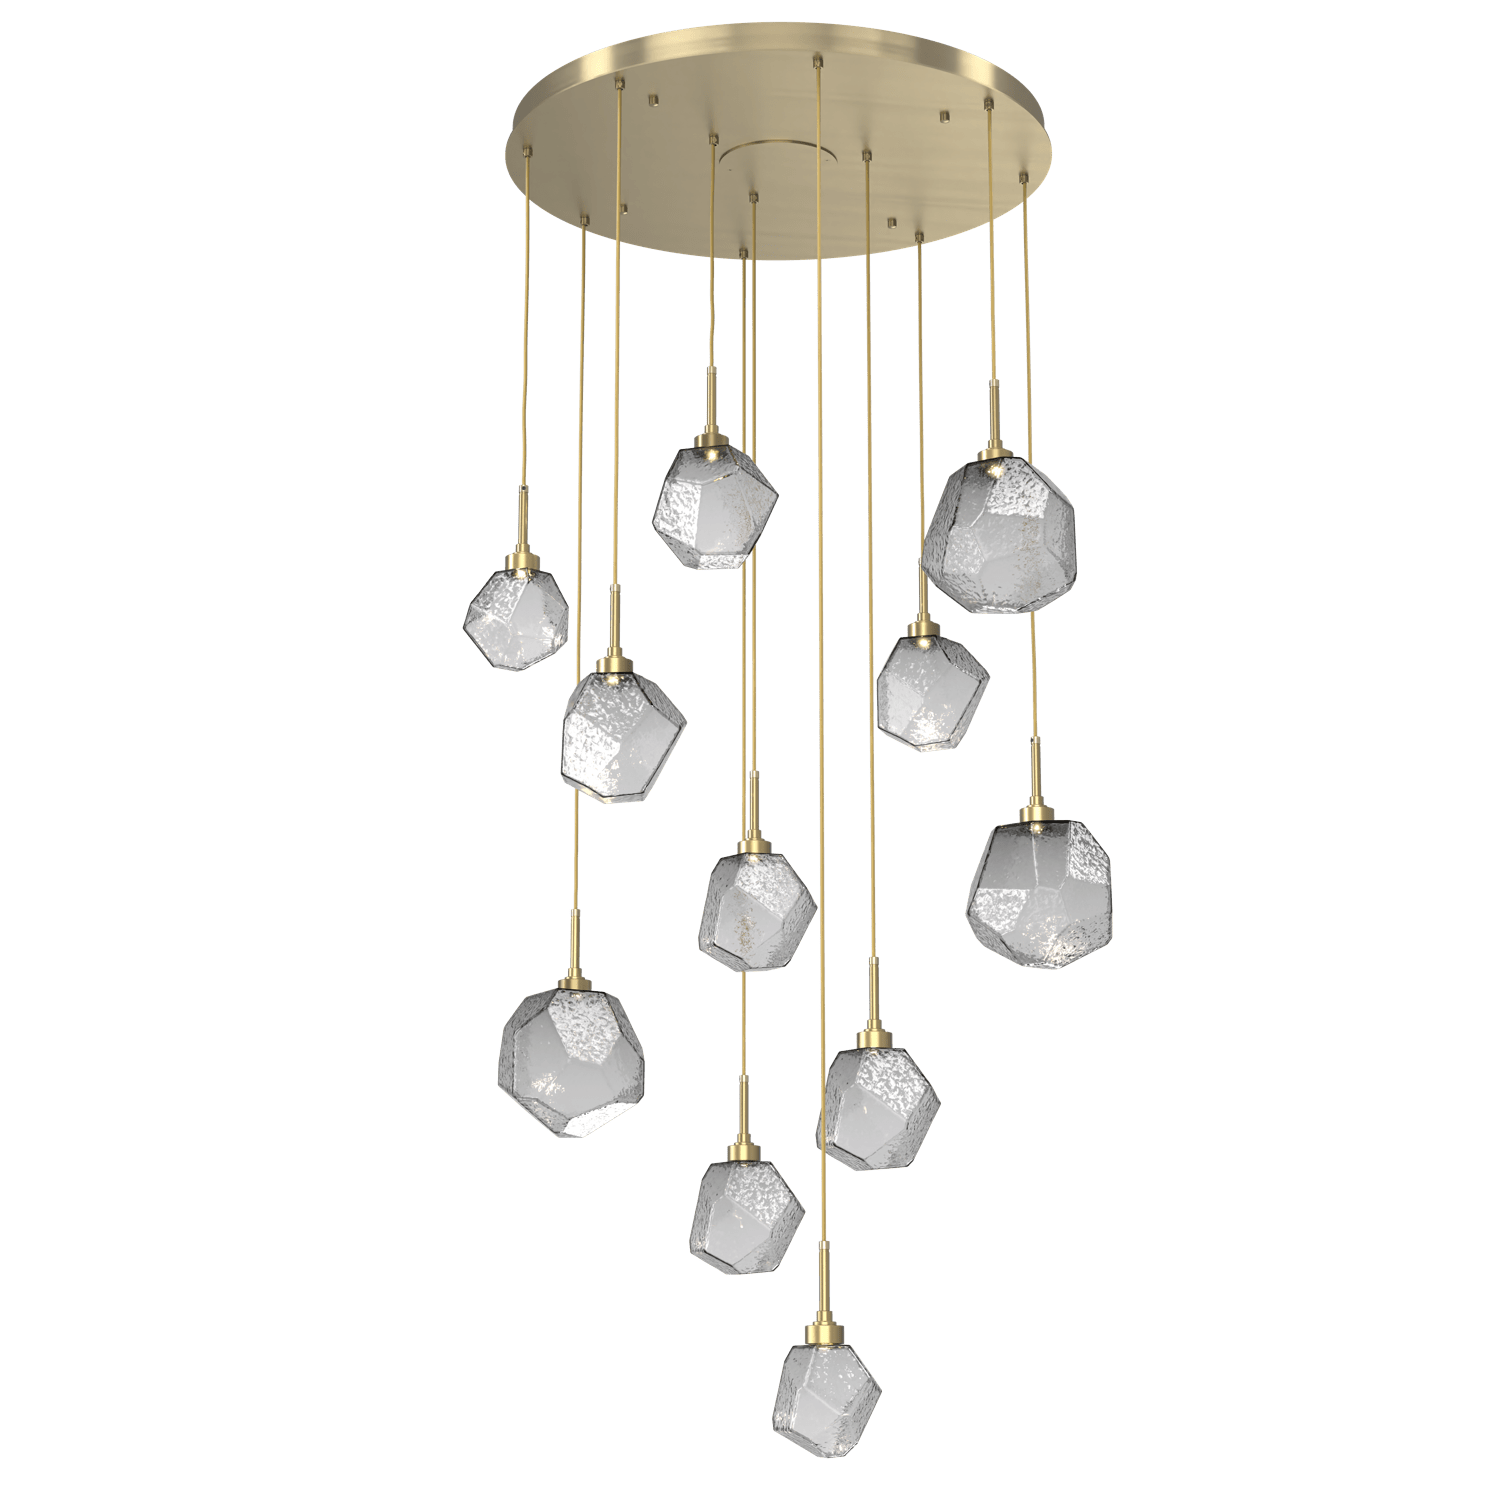 CHB0039-11-HB-S-Hammerton-Studio-Gem-11-light-round-pendant-chandelier-with-heritage-brass-finish-and-smoke-blown-glass-shades-and-LED-lamping